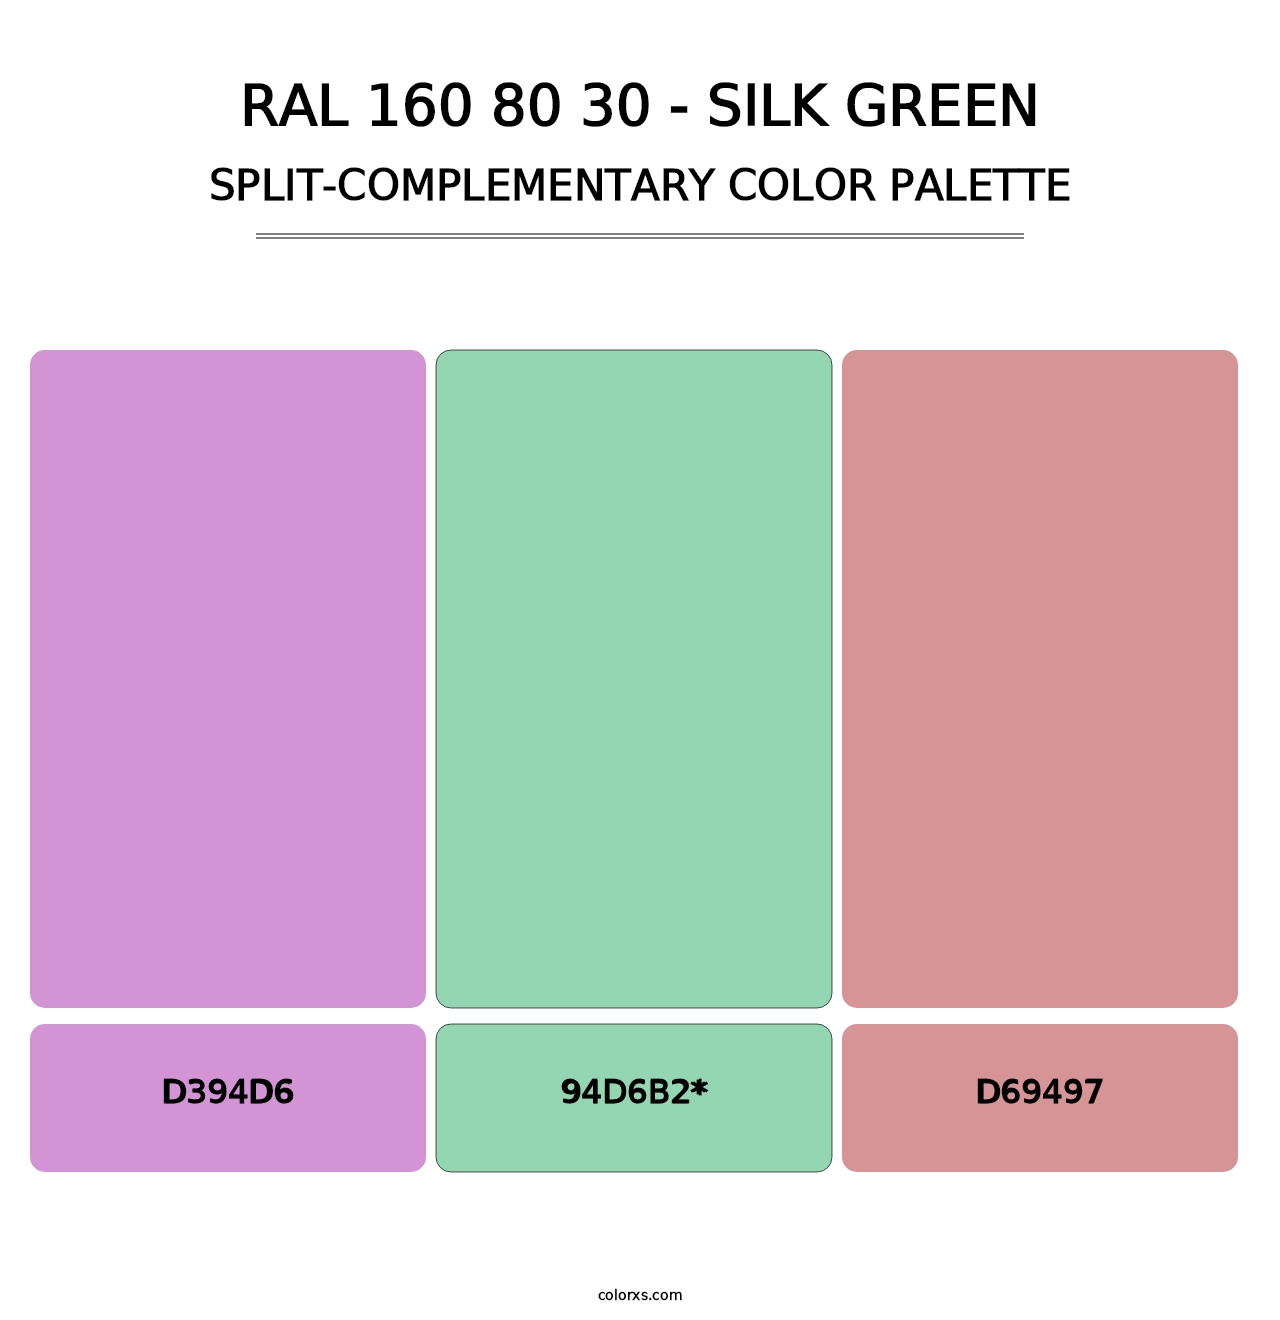 RAL 160 80 30 - Silk Green - Split-Complementary Color Palette